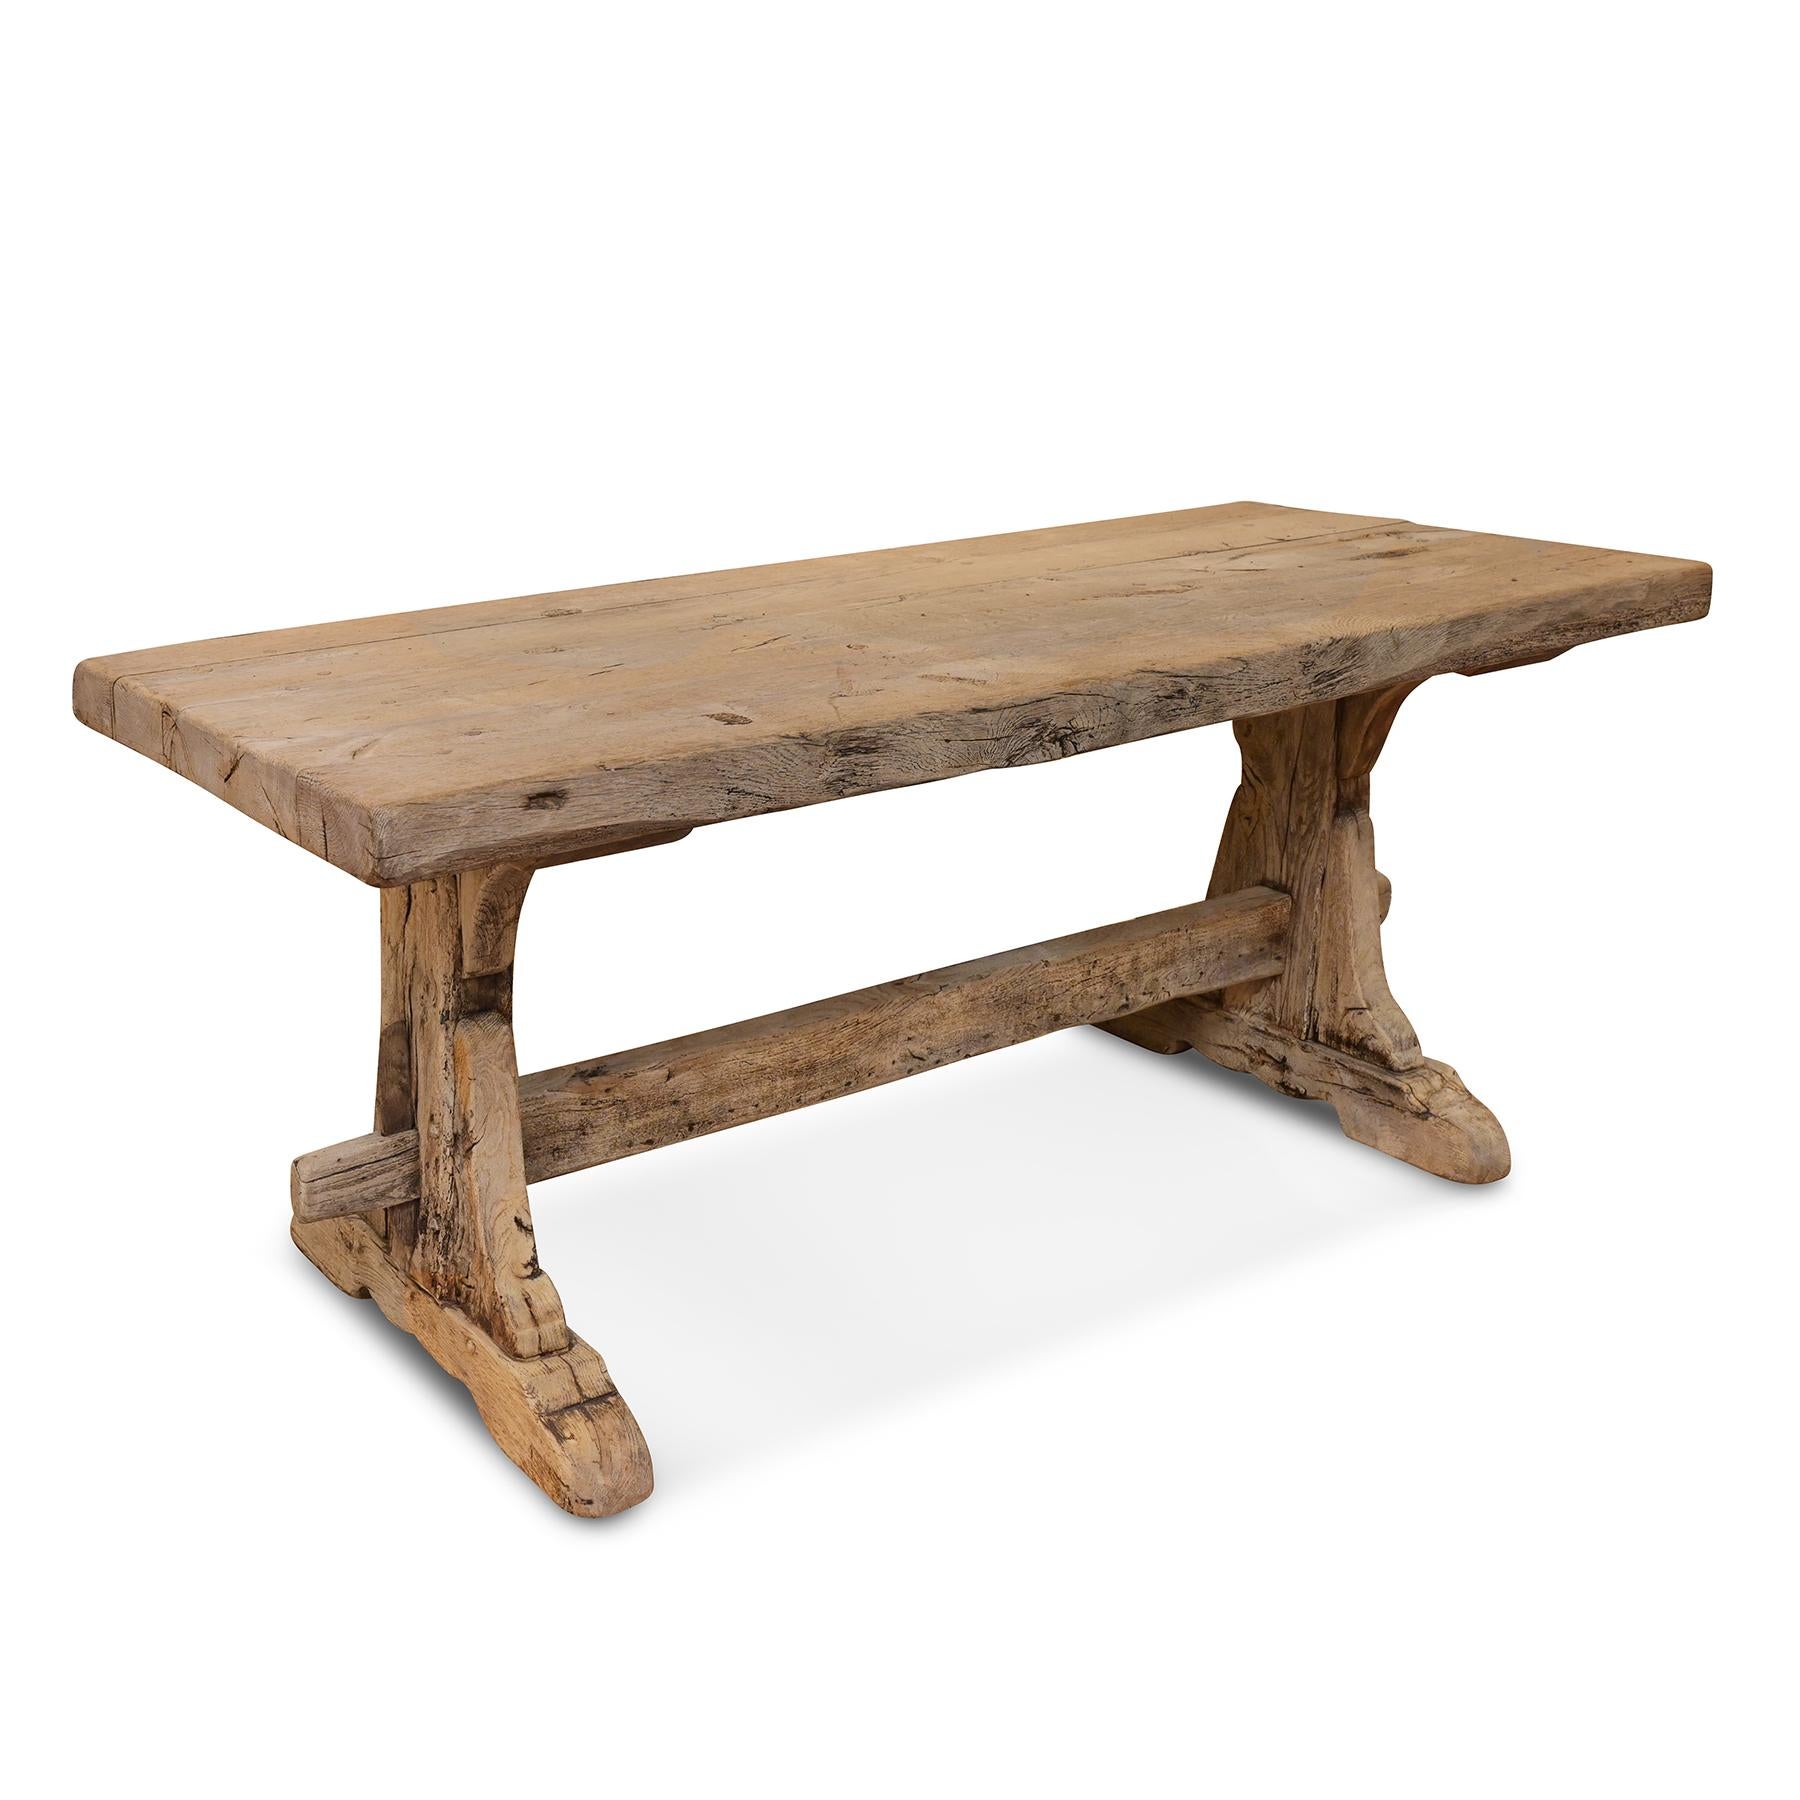 English 18th c. Oak Trestle Table, Bunny Williams Collection For Sale